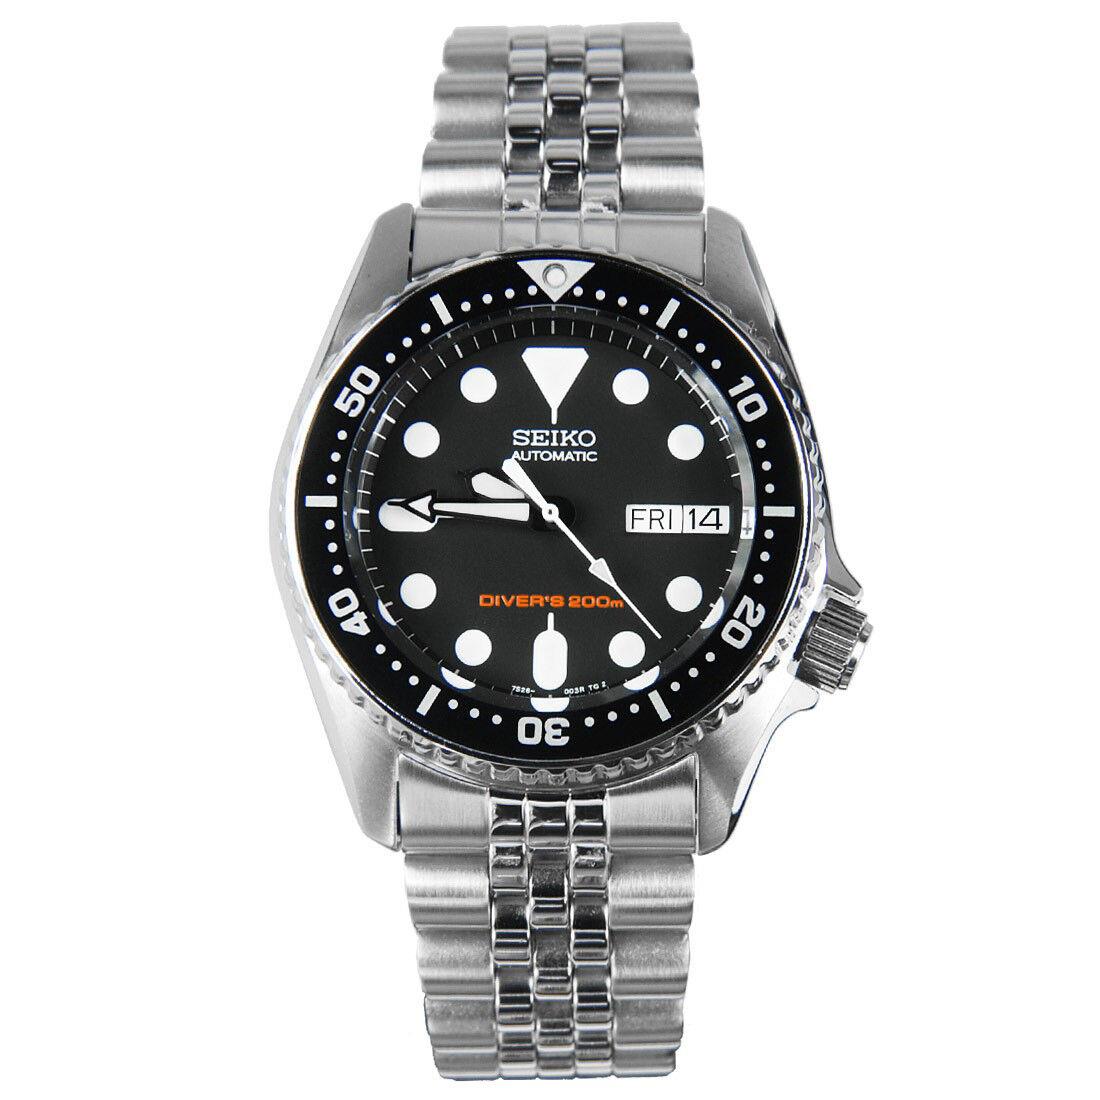 Seiko SKX013 Automatic Black Dial Stainless Steel 200m Divers Watch SKX013K2